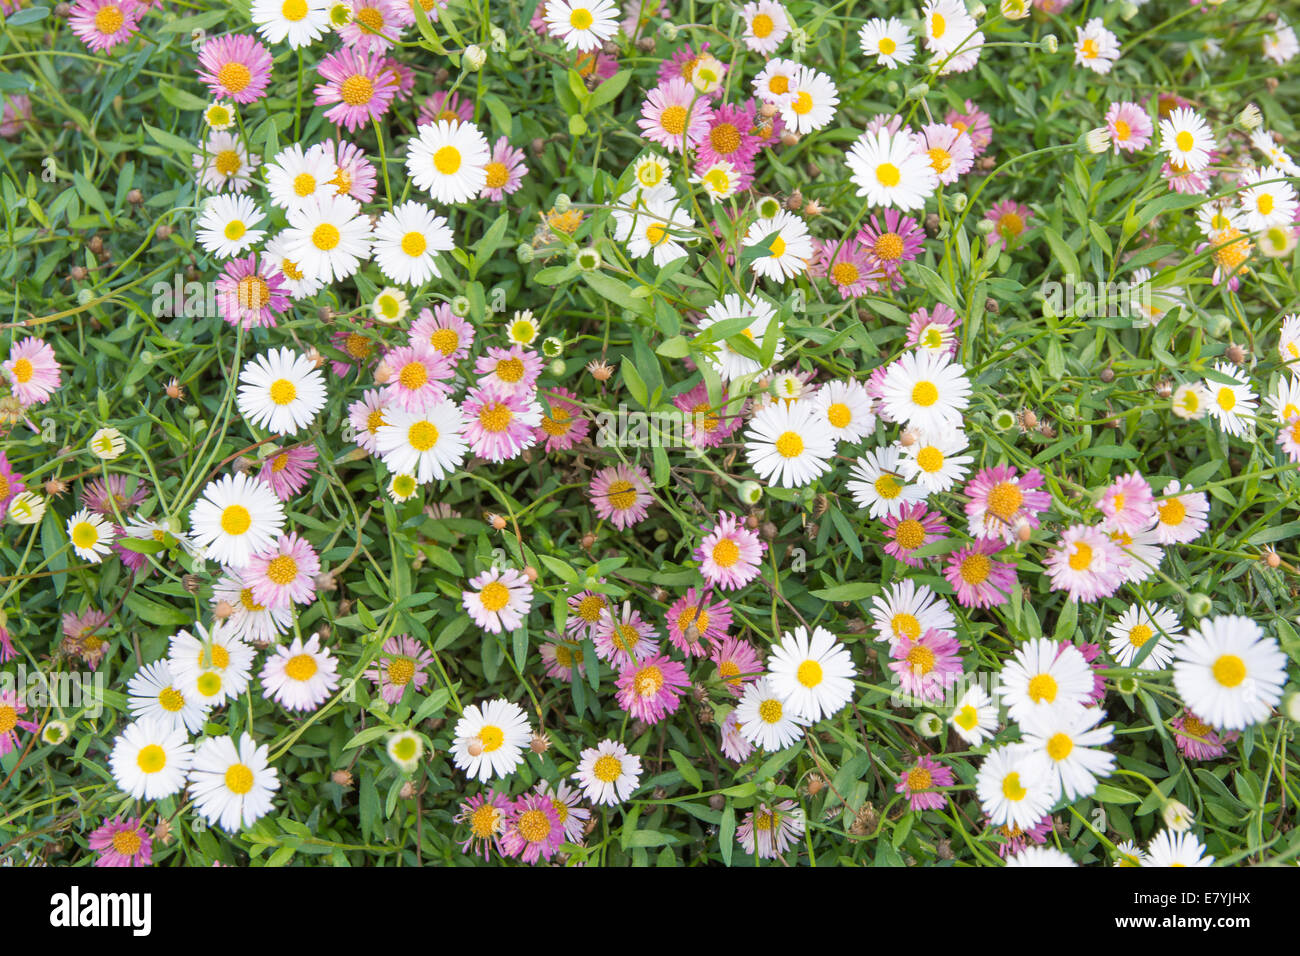 Purple and white Bellis perennis covering a lawn of grass. Stock Photo